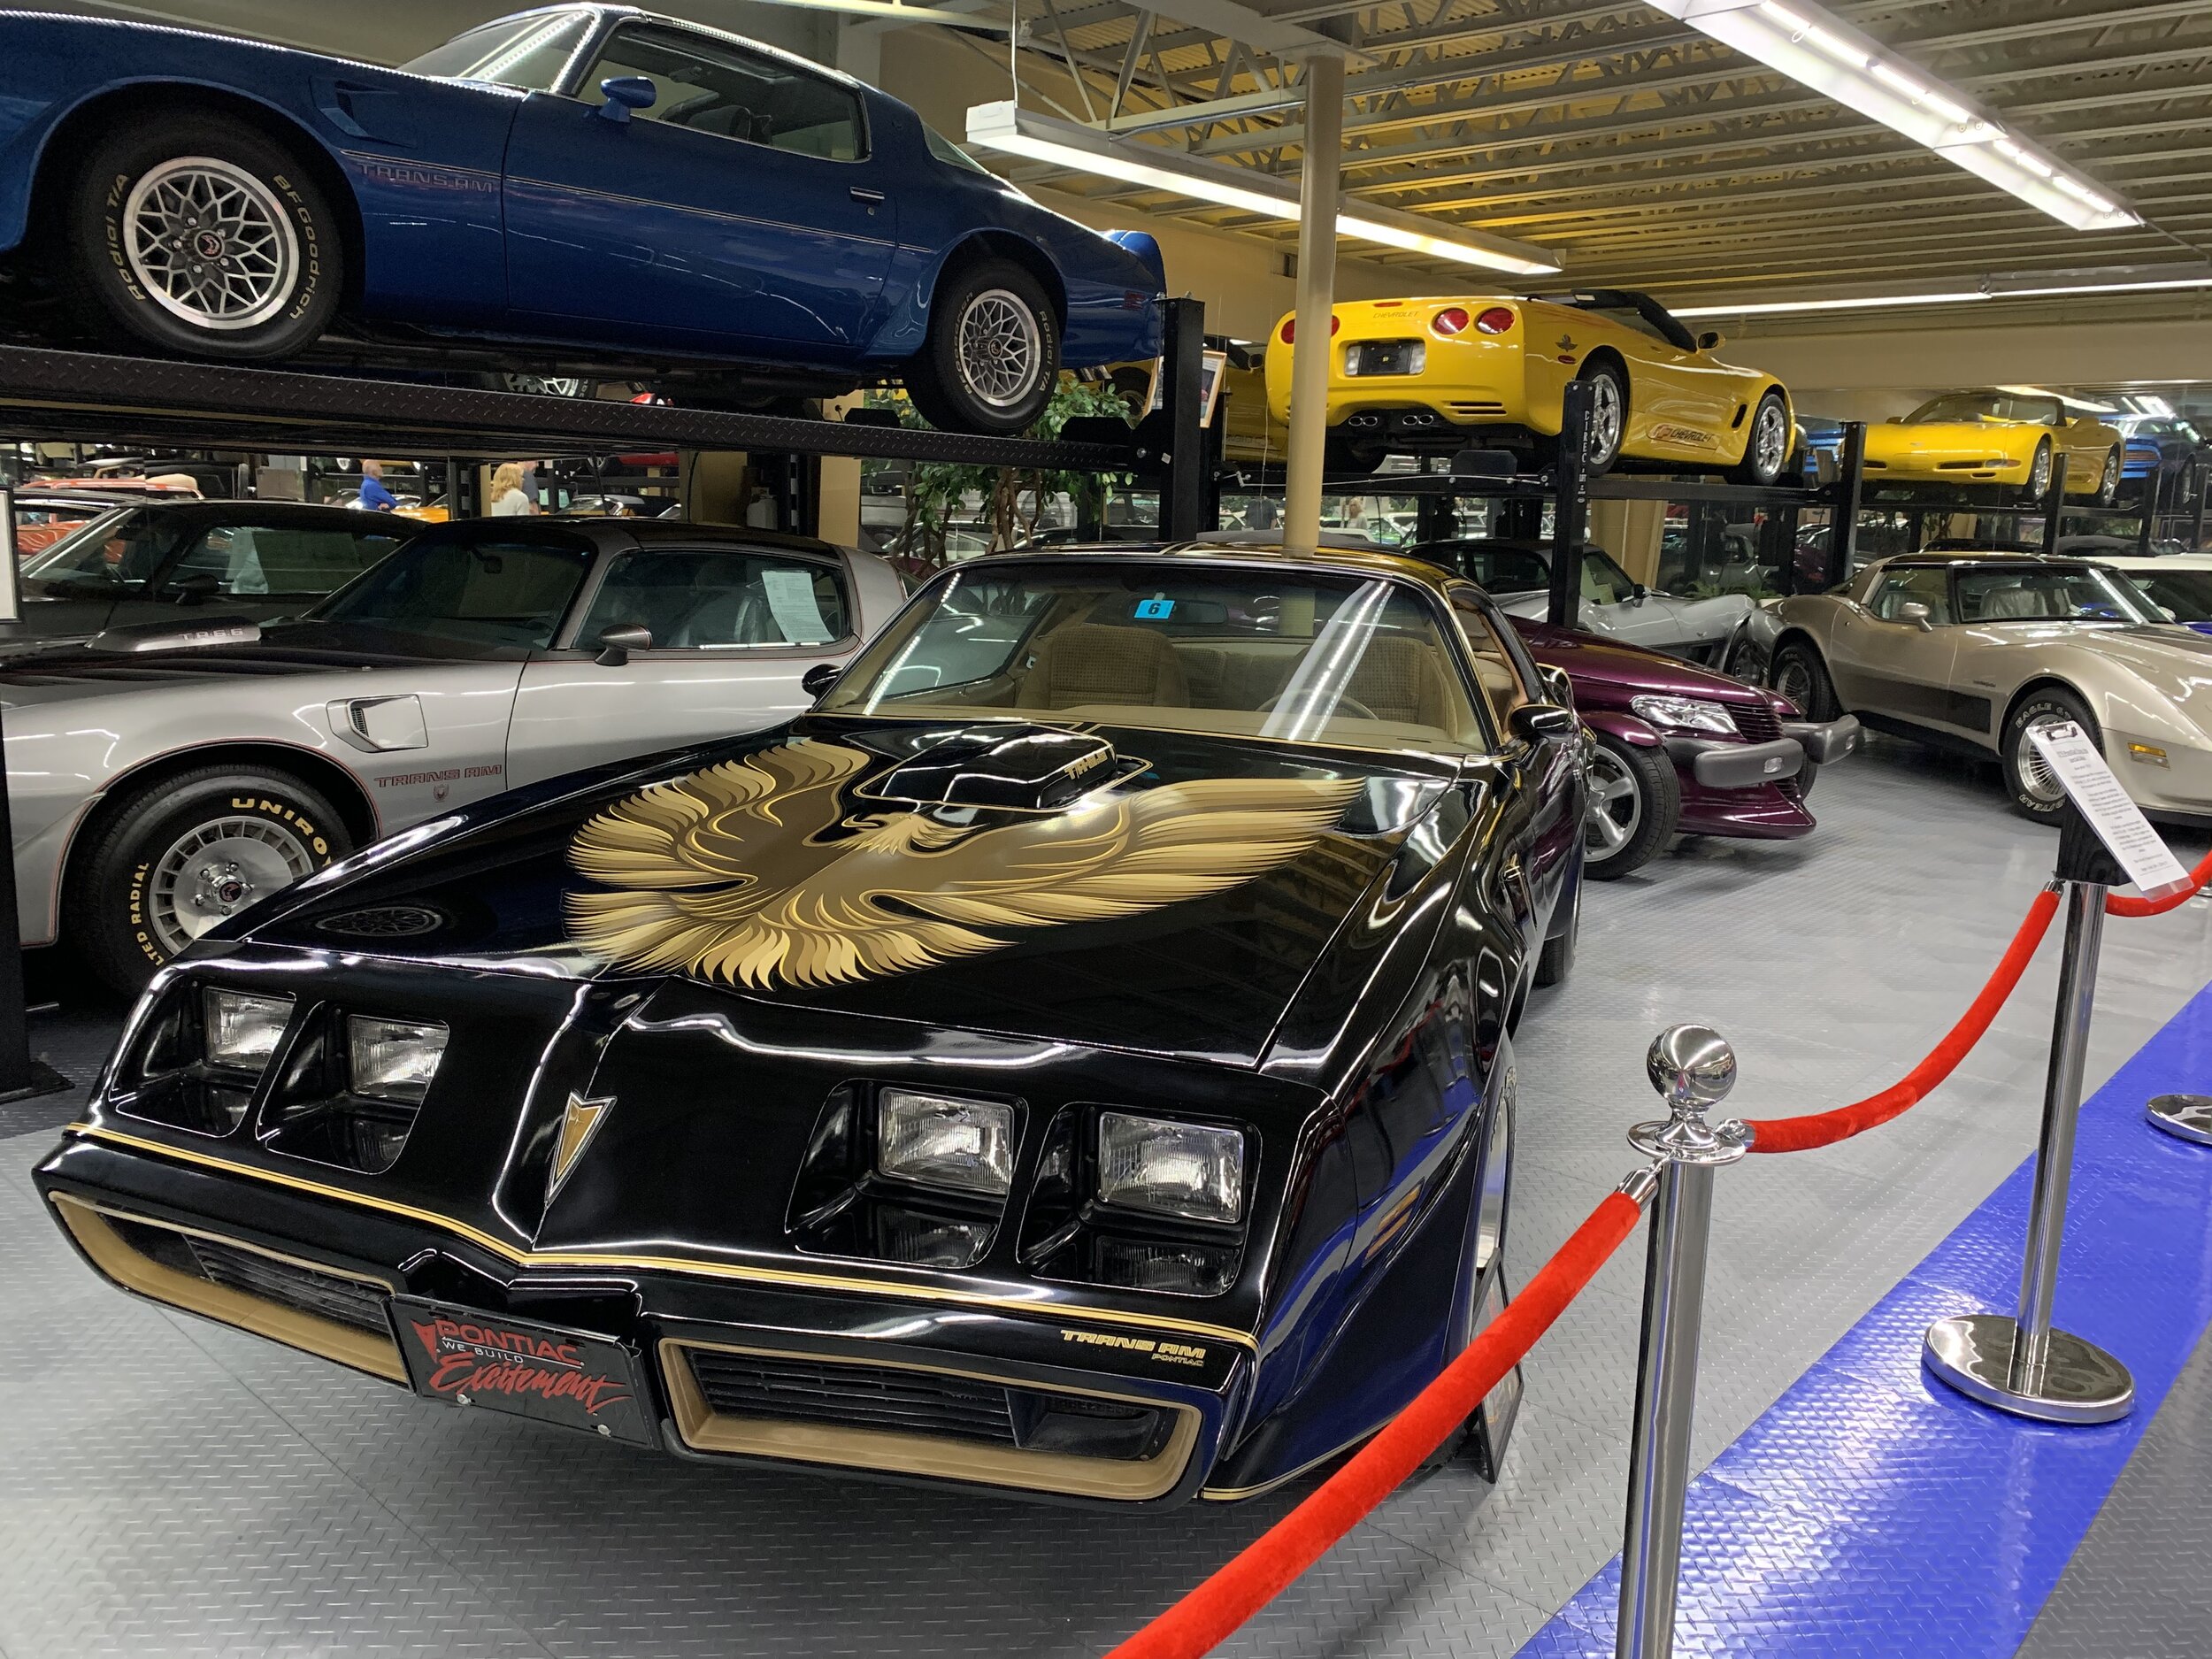  This Trans Am has only 10 actual miles on it. The interior is in perfect condition. 